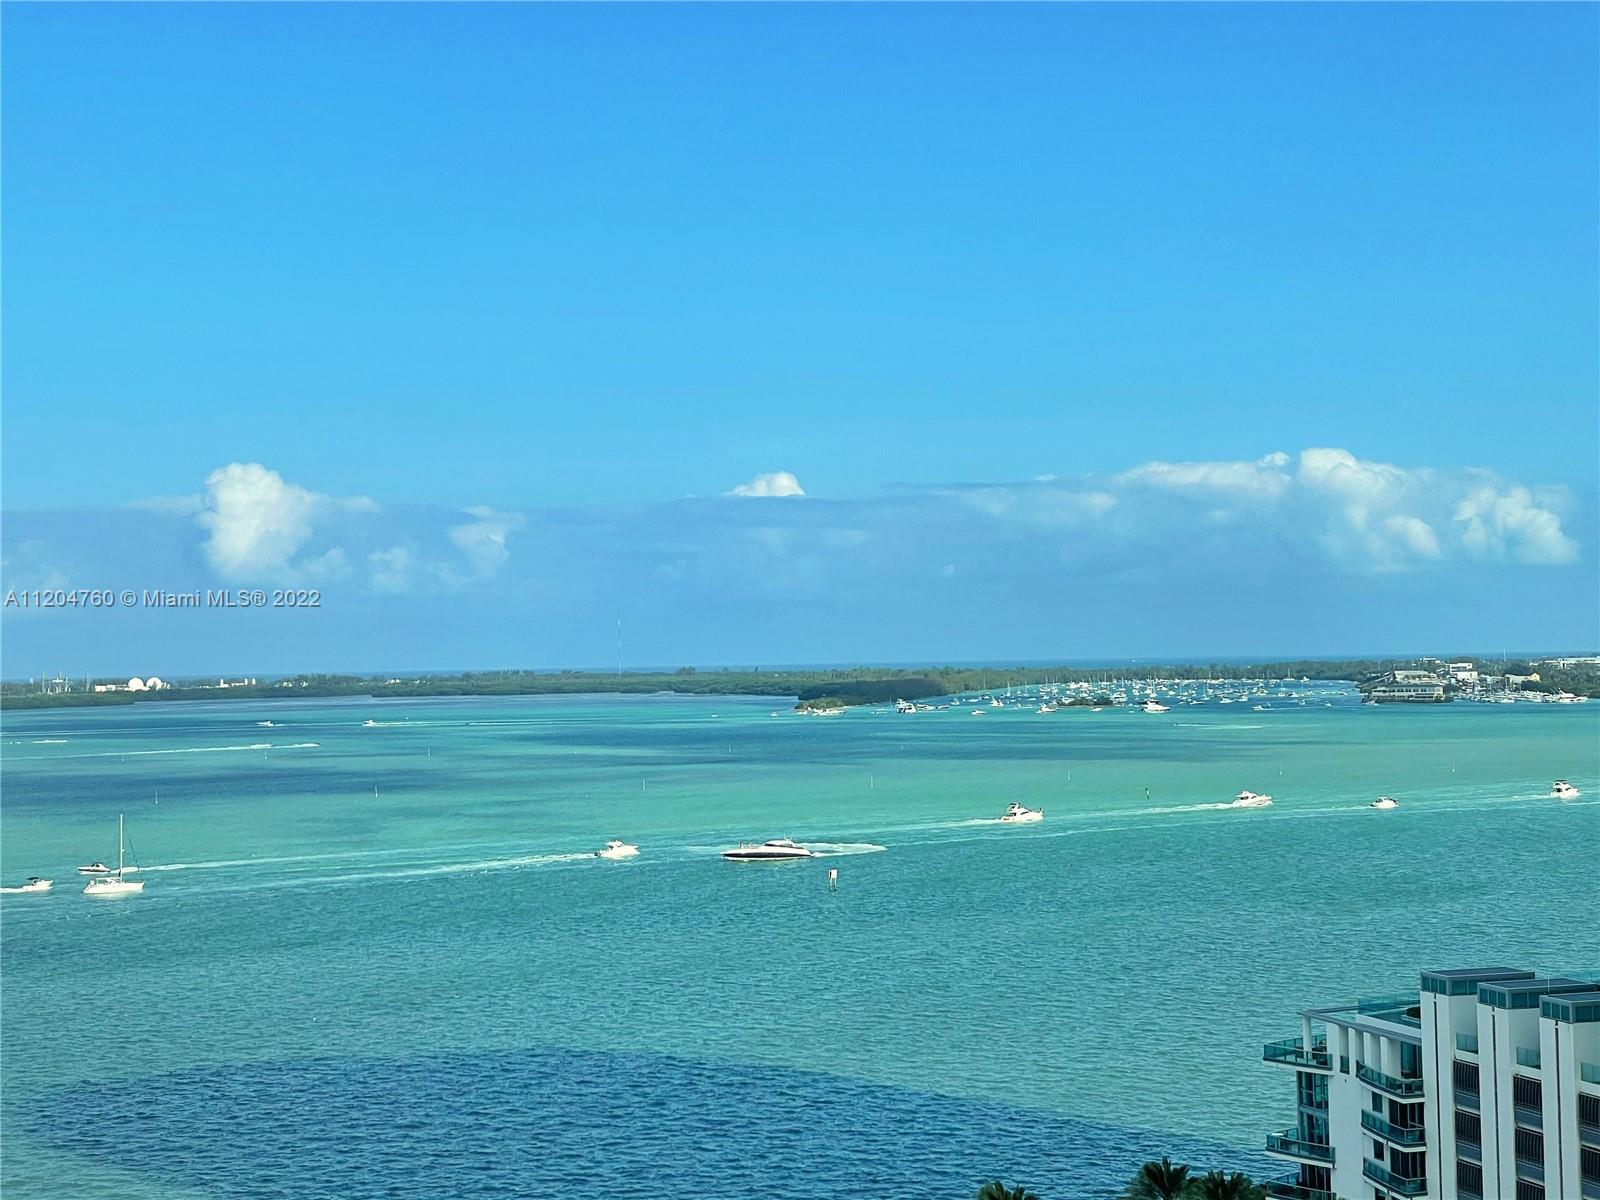 Spectacular sky residence in the heart of Brickell offering mesmerizing ocean views and dramatic cit